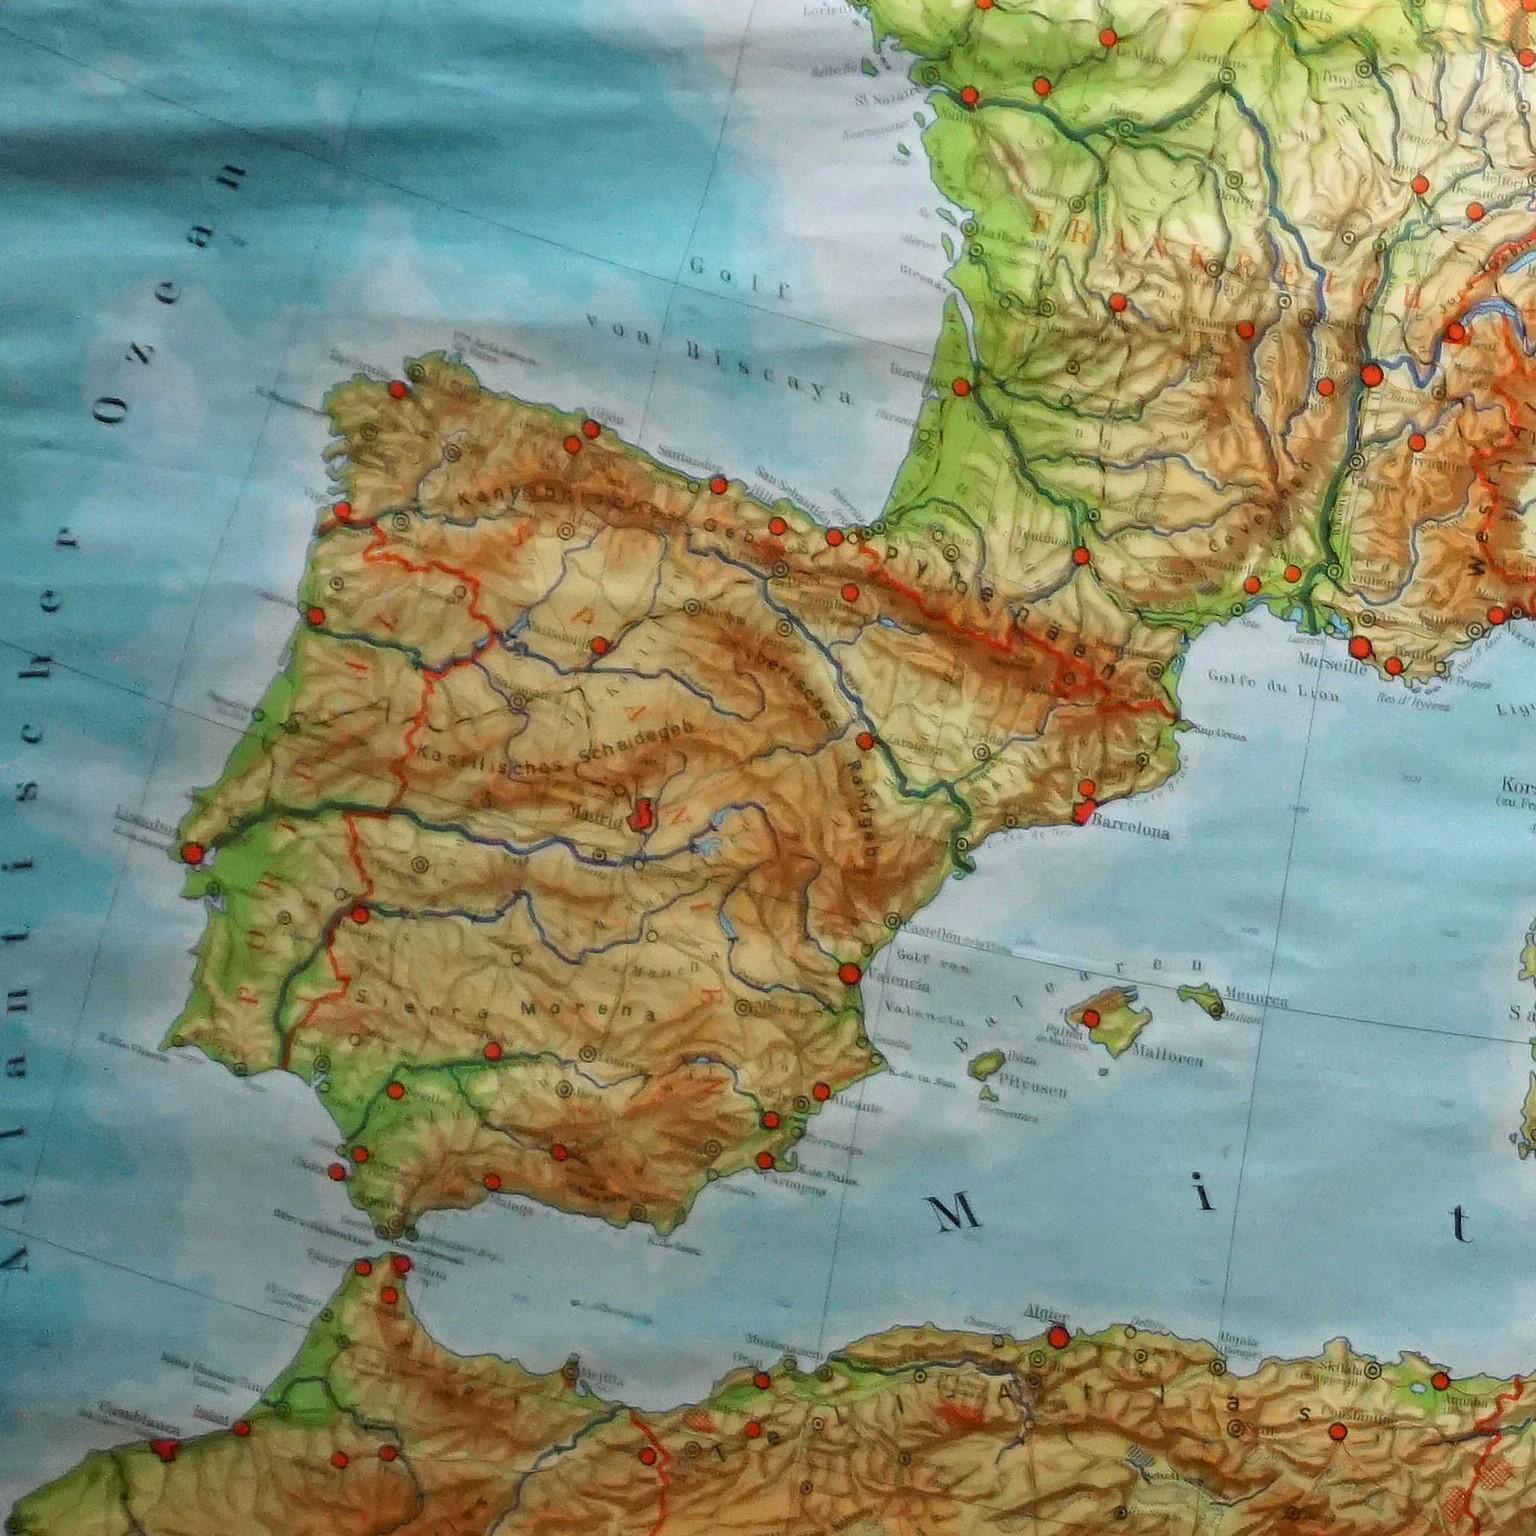 A large countrycore pull-down map showing the countries surrounding the Mediterranean Sea, published by Westermann. Colorful print on paper reinforced with canvas.
Measurements:
Width 269 cm (105.91 inch)
Height 149 cm (58.66 inch)

The measurements